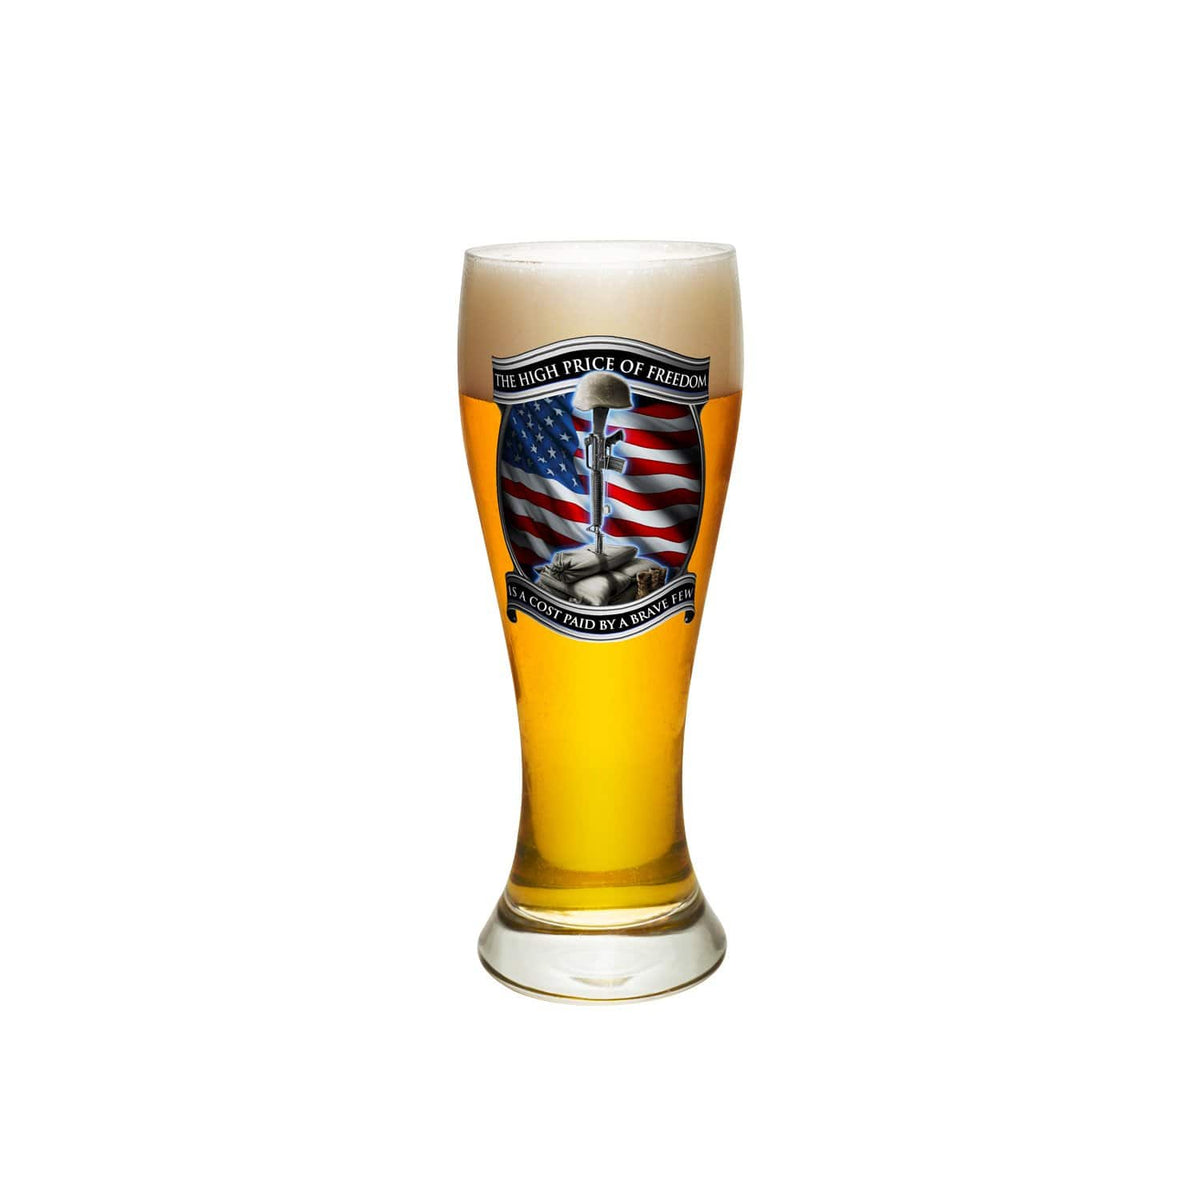 High Price Of Freedom Pilsner Glass